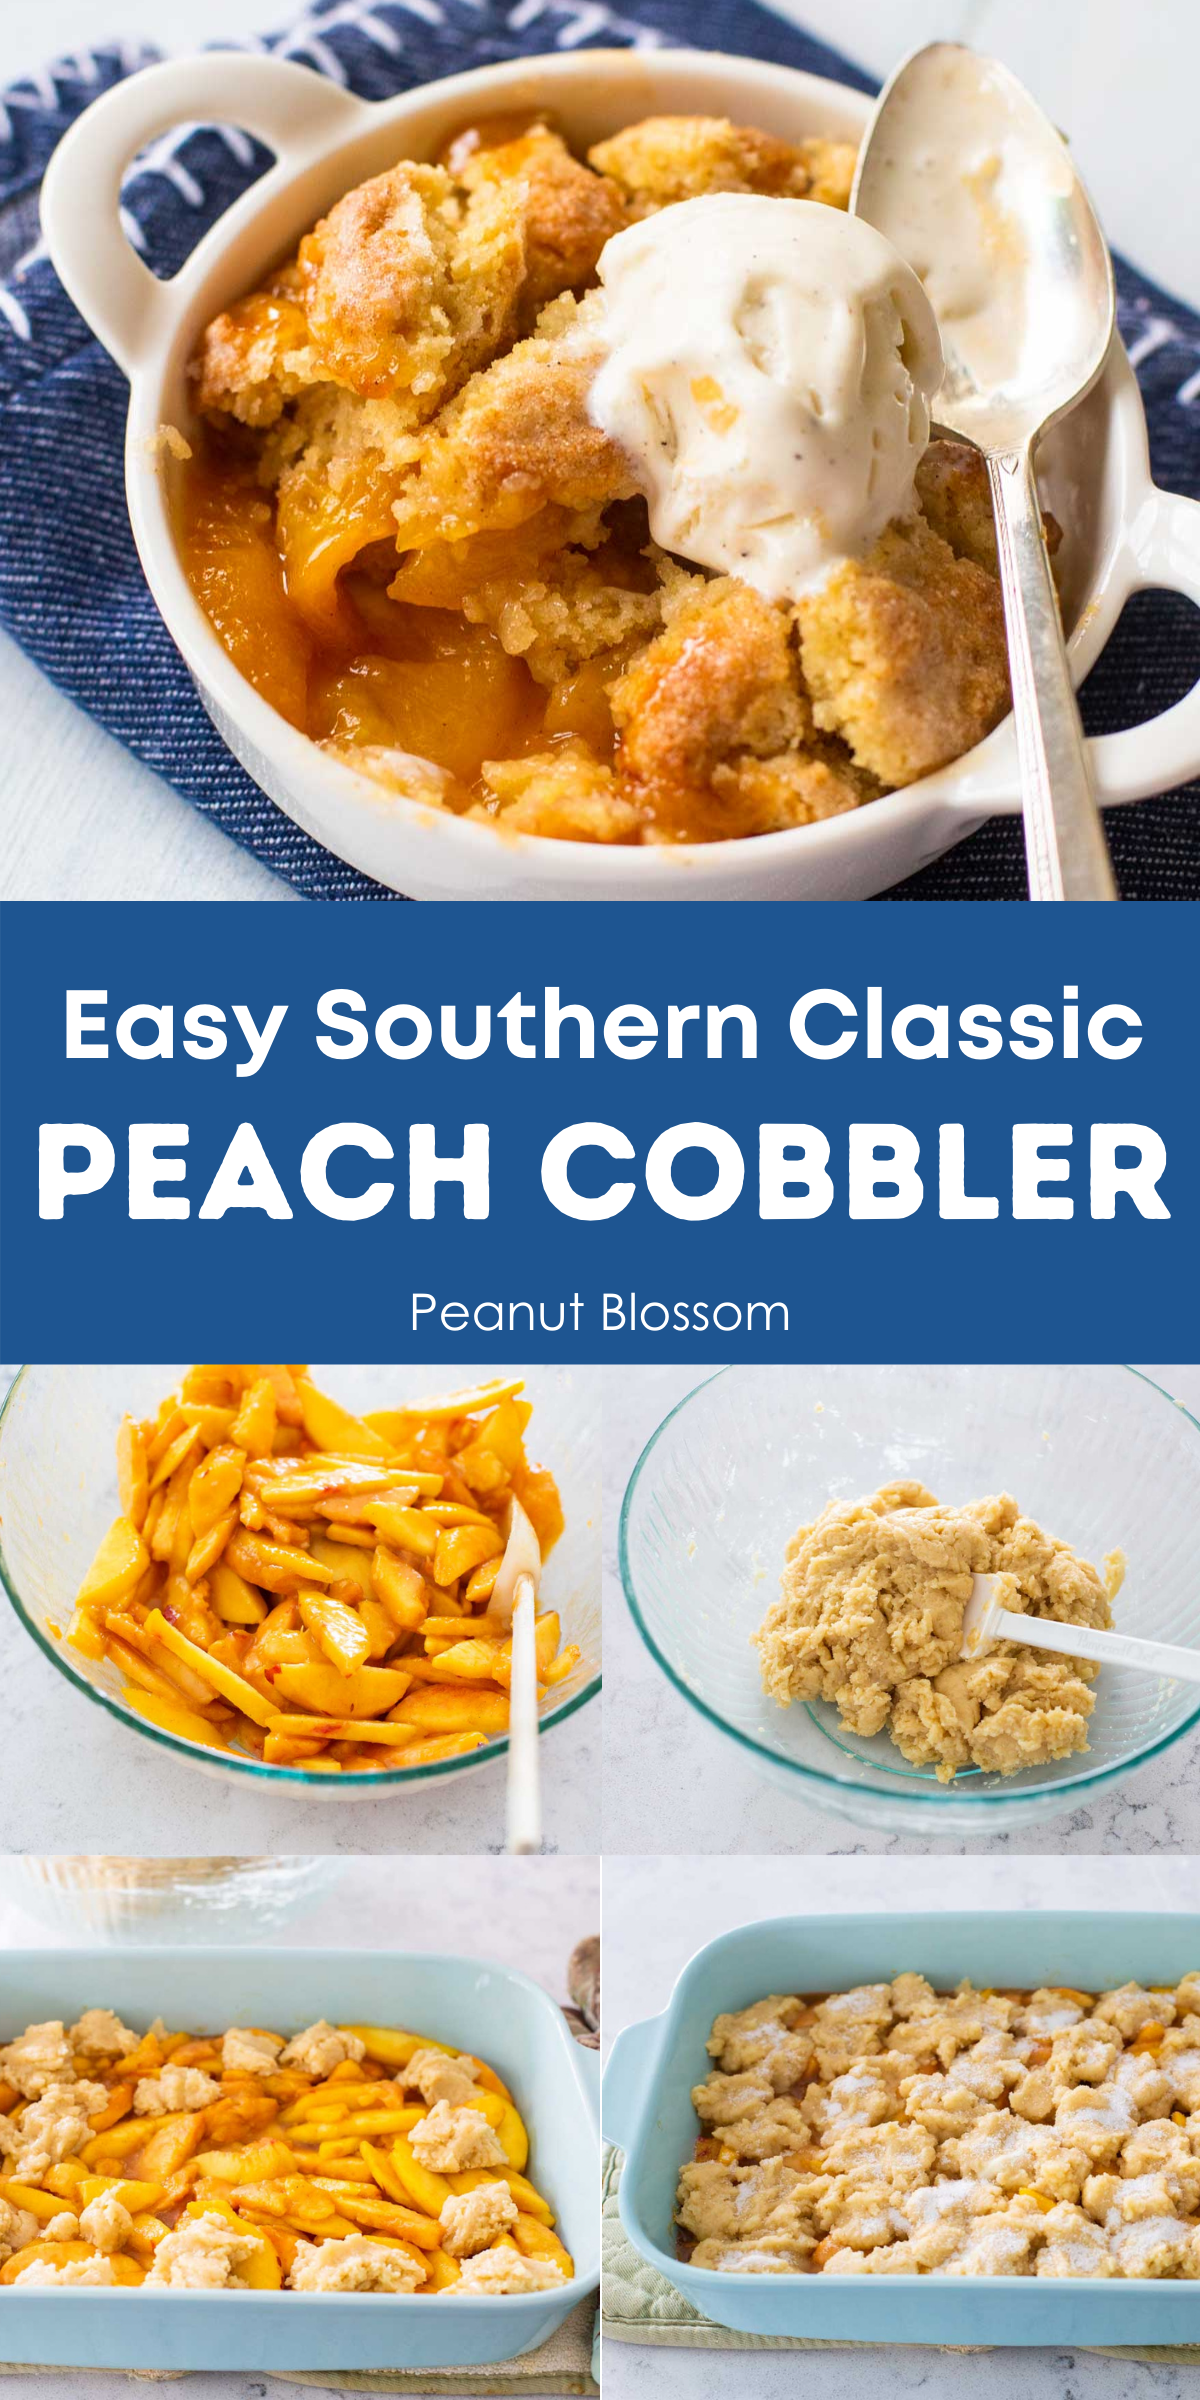 Step by step collage shows how to make southern peach cobbler.